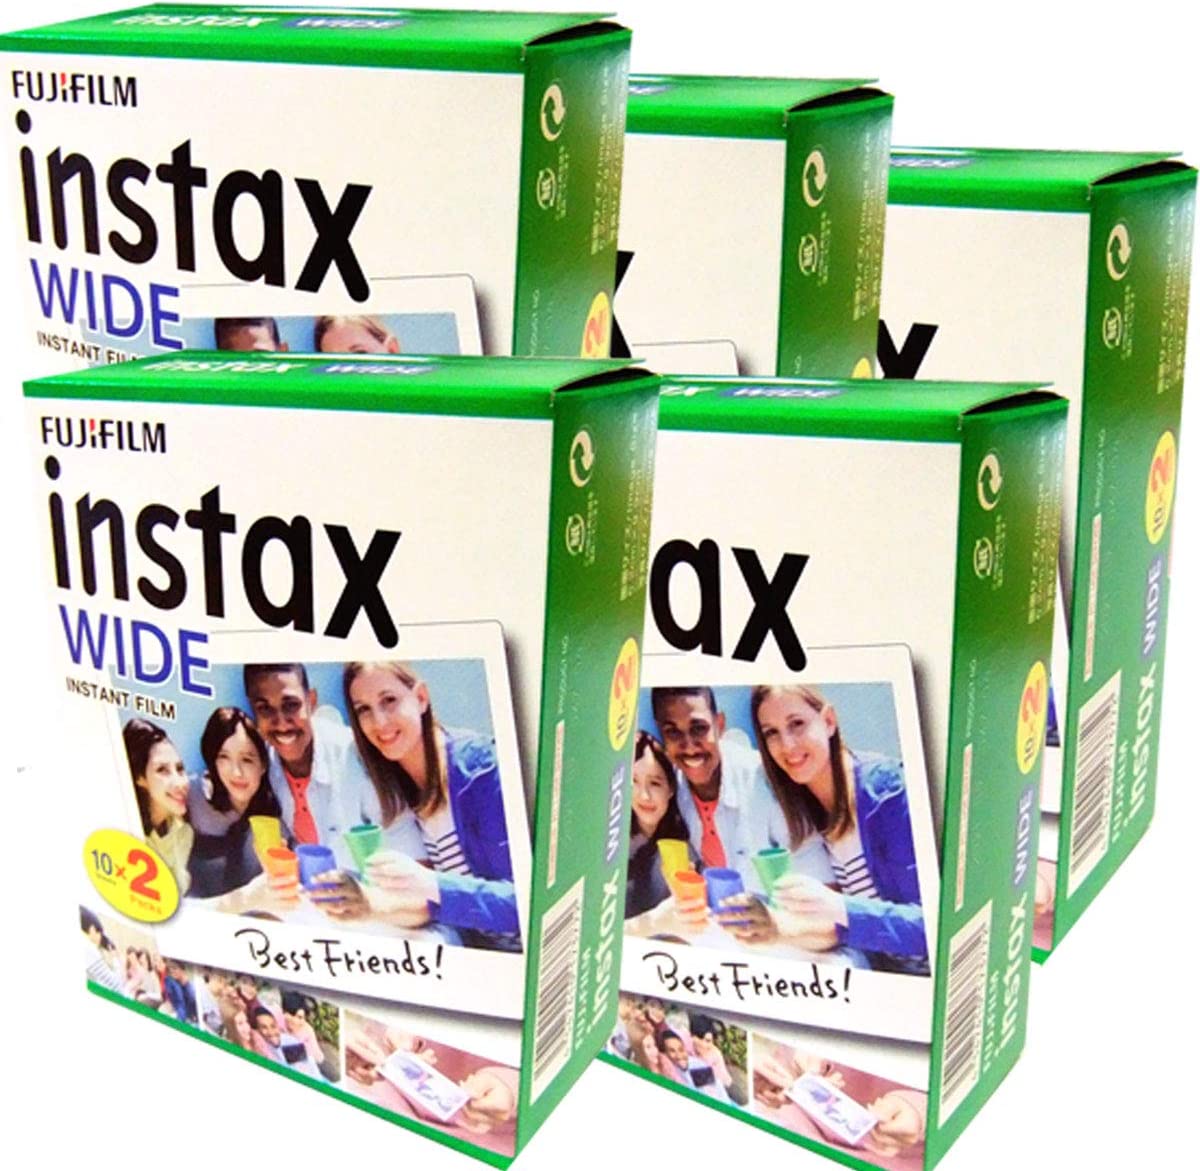 Product Image of 5x Fuji Instax Wide Film for Fujifilm 300 210 200 100 Instant Cameras